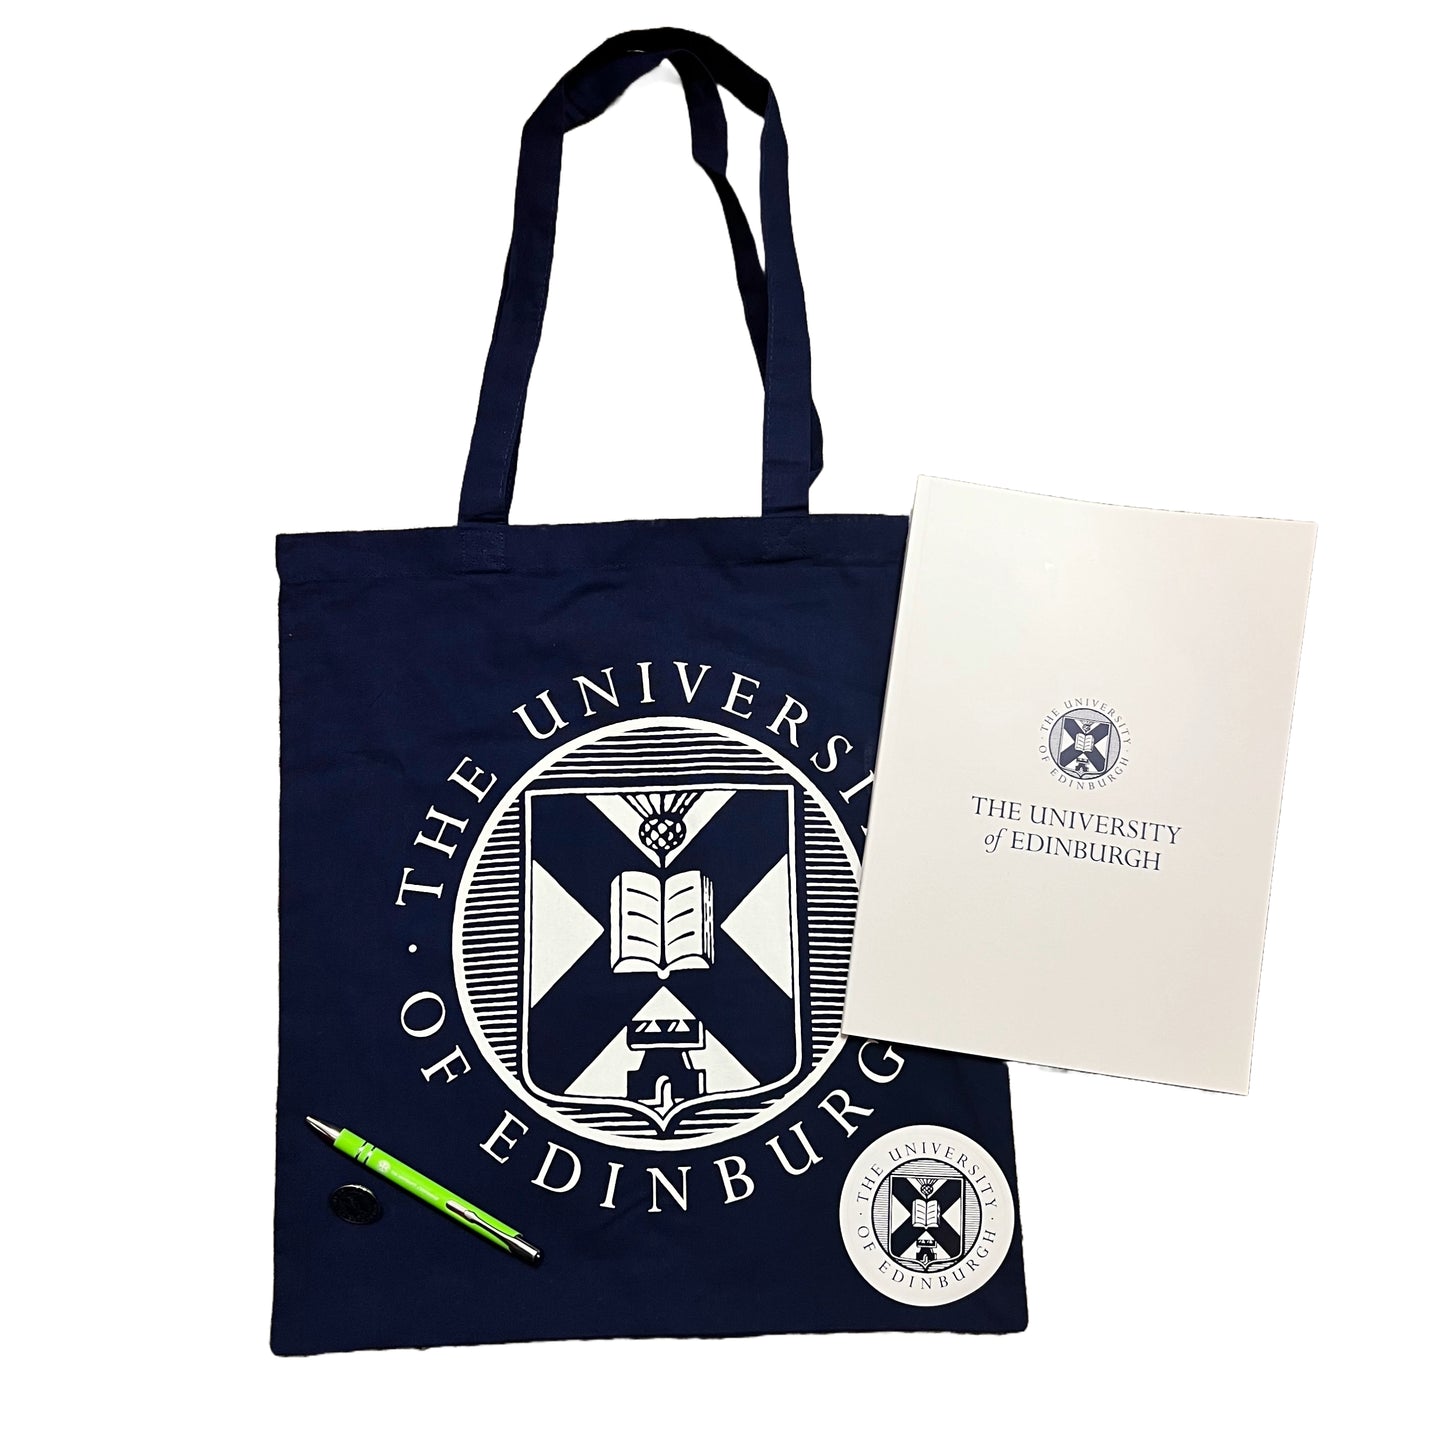 Navy tote bag with white university crest, white a4 notebook with navy crest, wihite and navy crest laptop sticker, green pen and navy crest pin badge